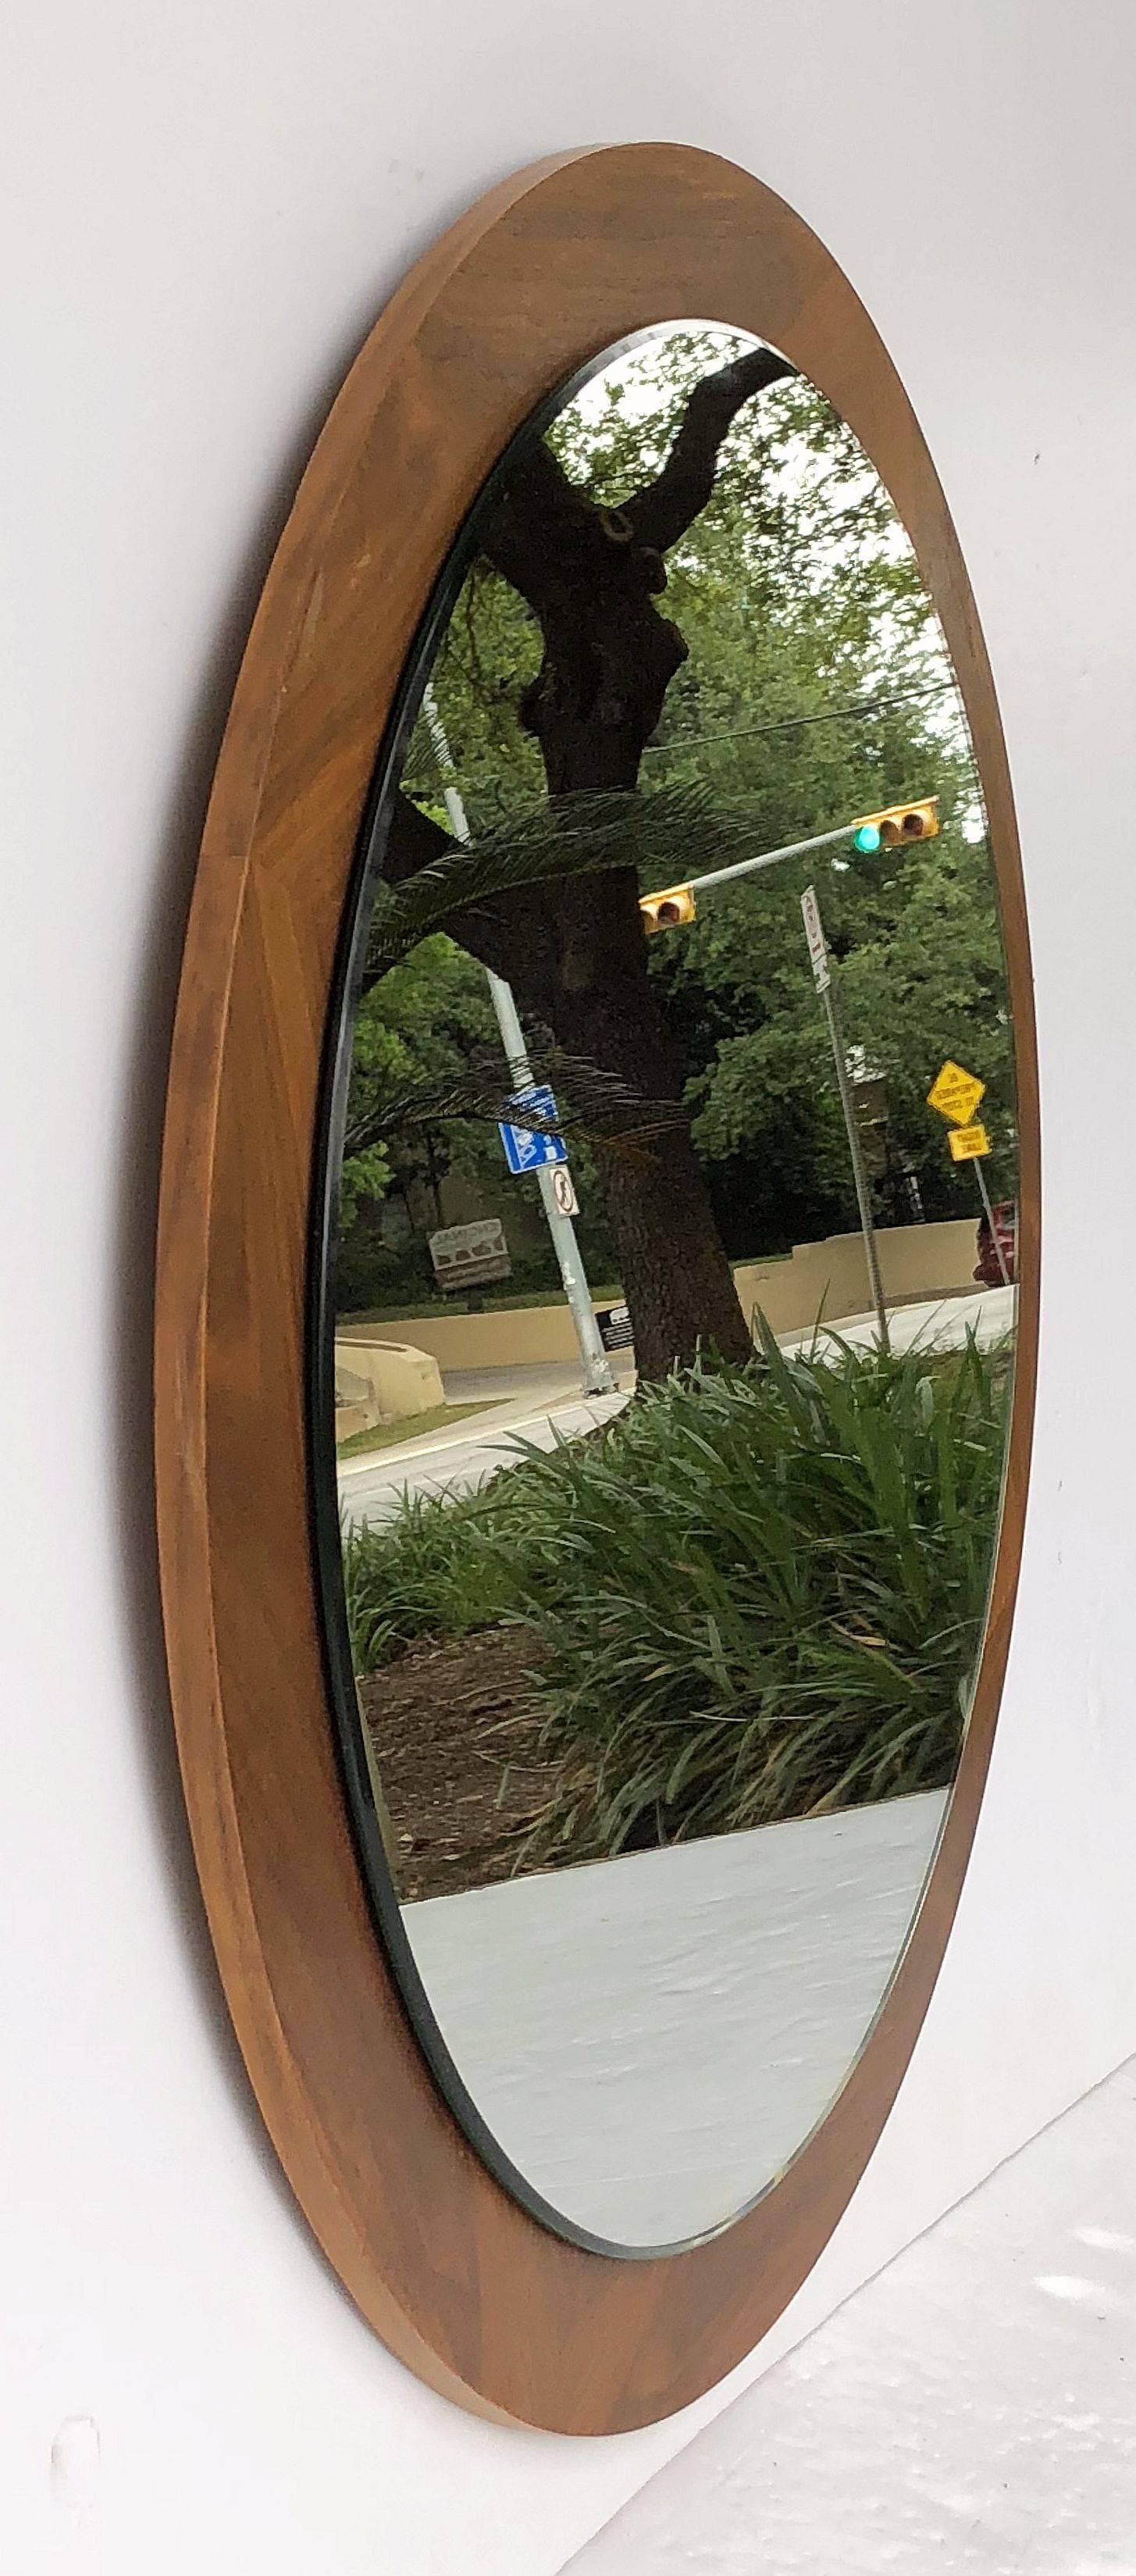 A fine English wall mirror featuring a round mirror mounted upon a circular teak wood backing.

Measures: Overall diameter is 27 1/2 inches

Round glass mirror diameter is 23 1/2 inches.